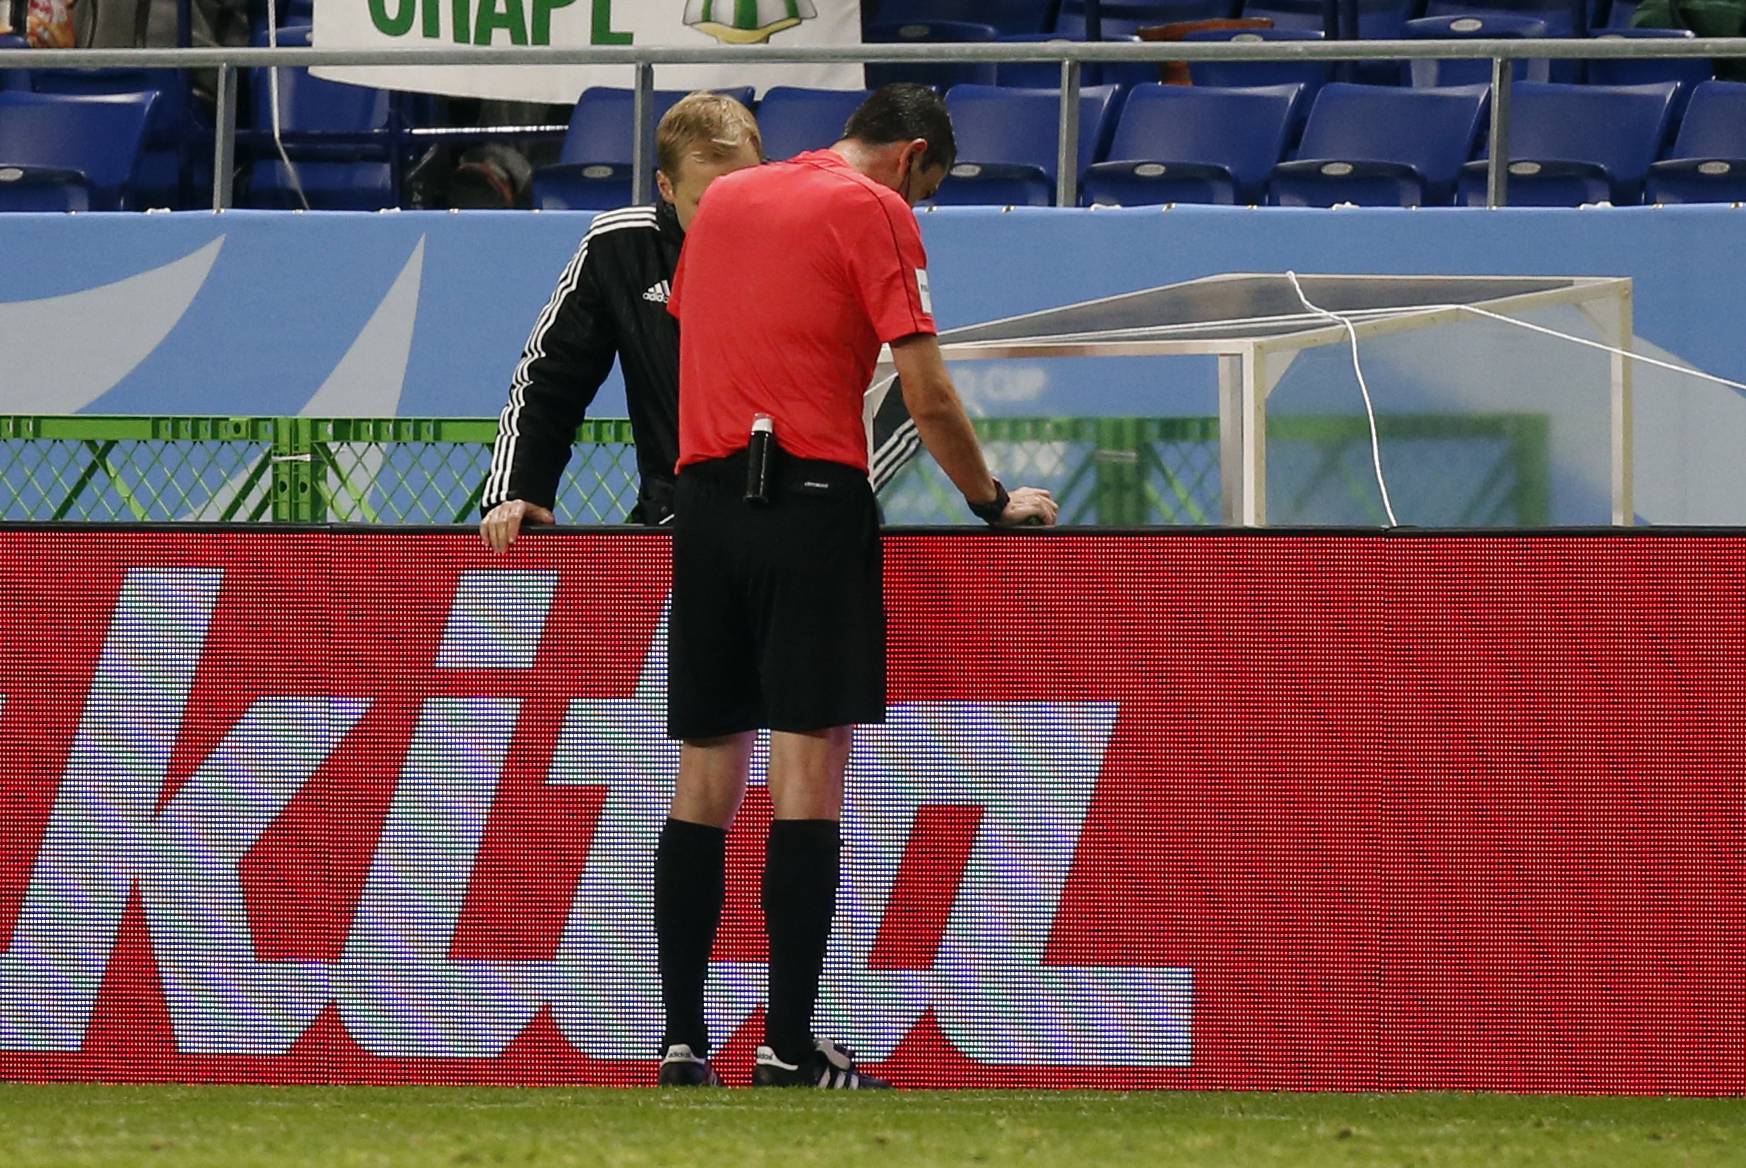 Referee Viktor Kassai references a video replay before his decision to award a penalty